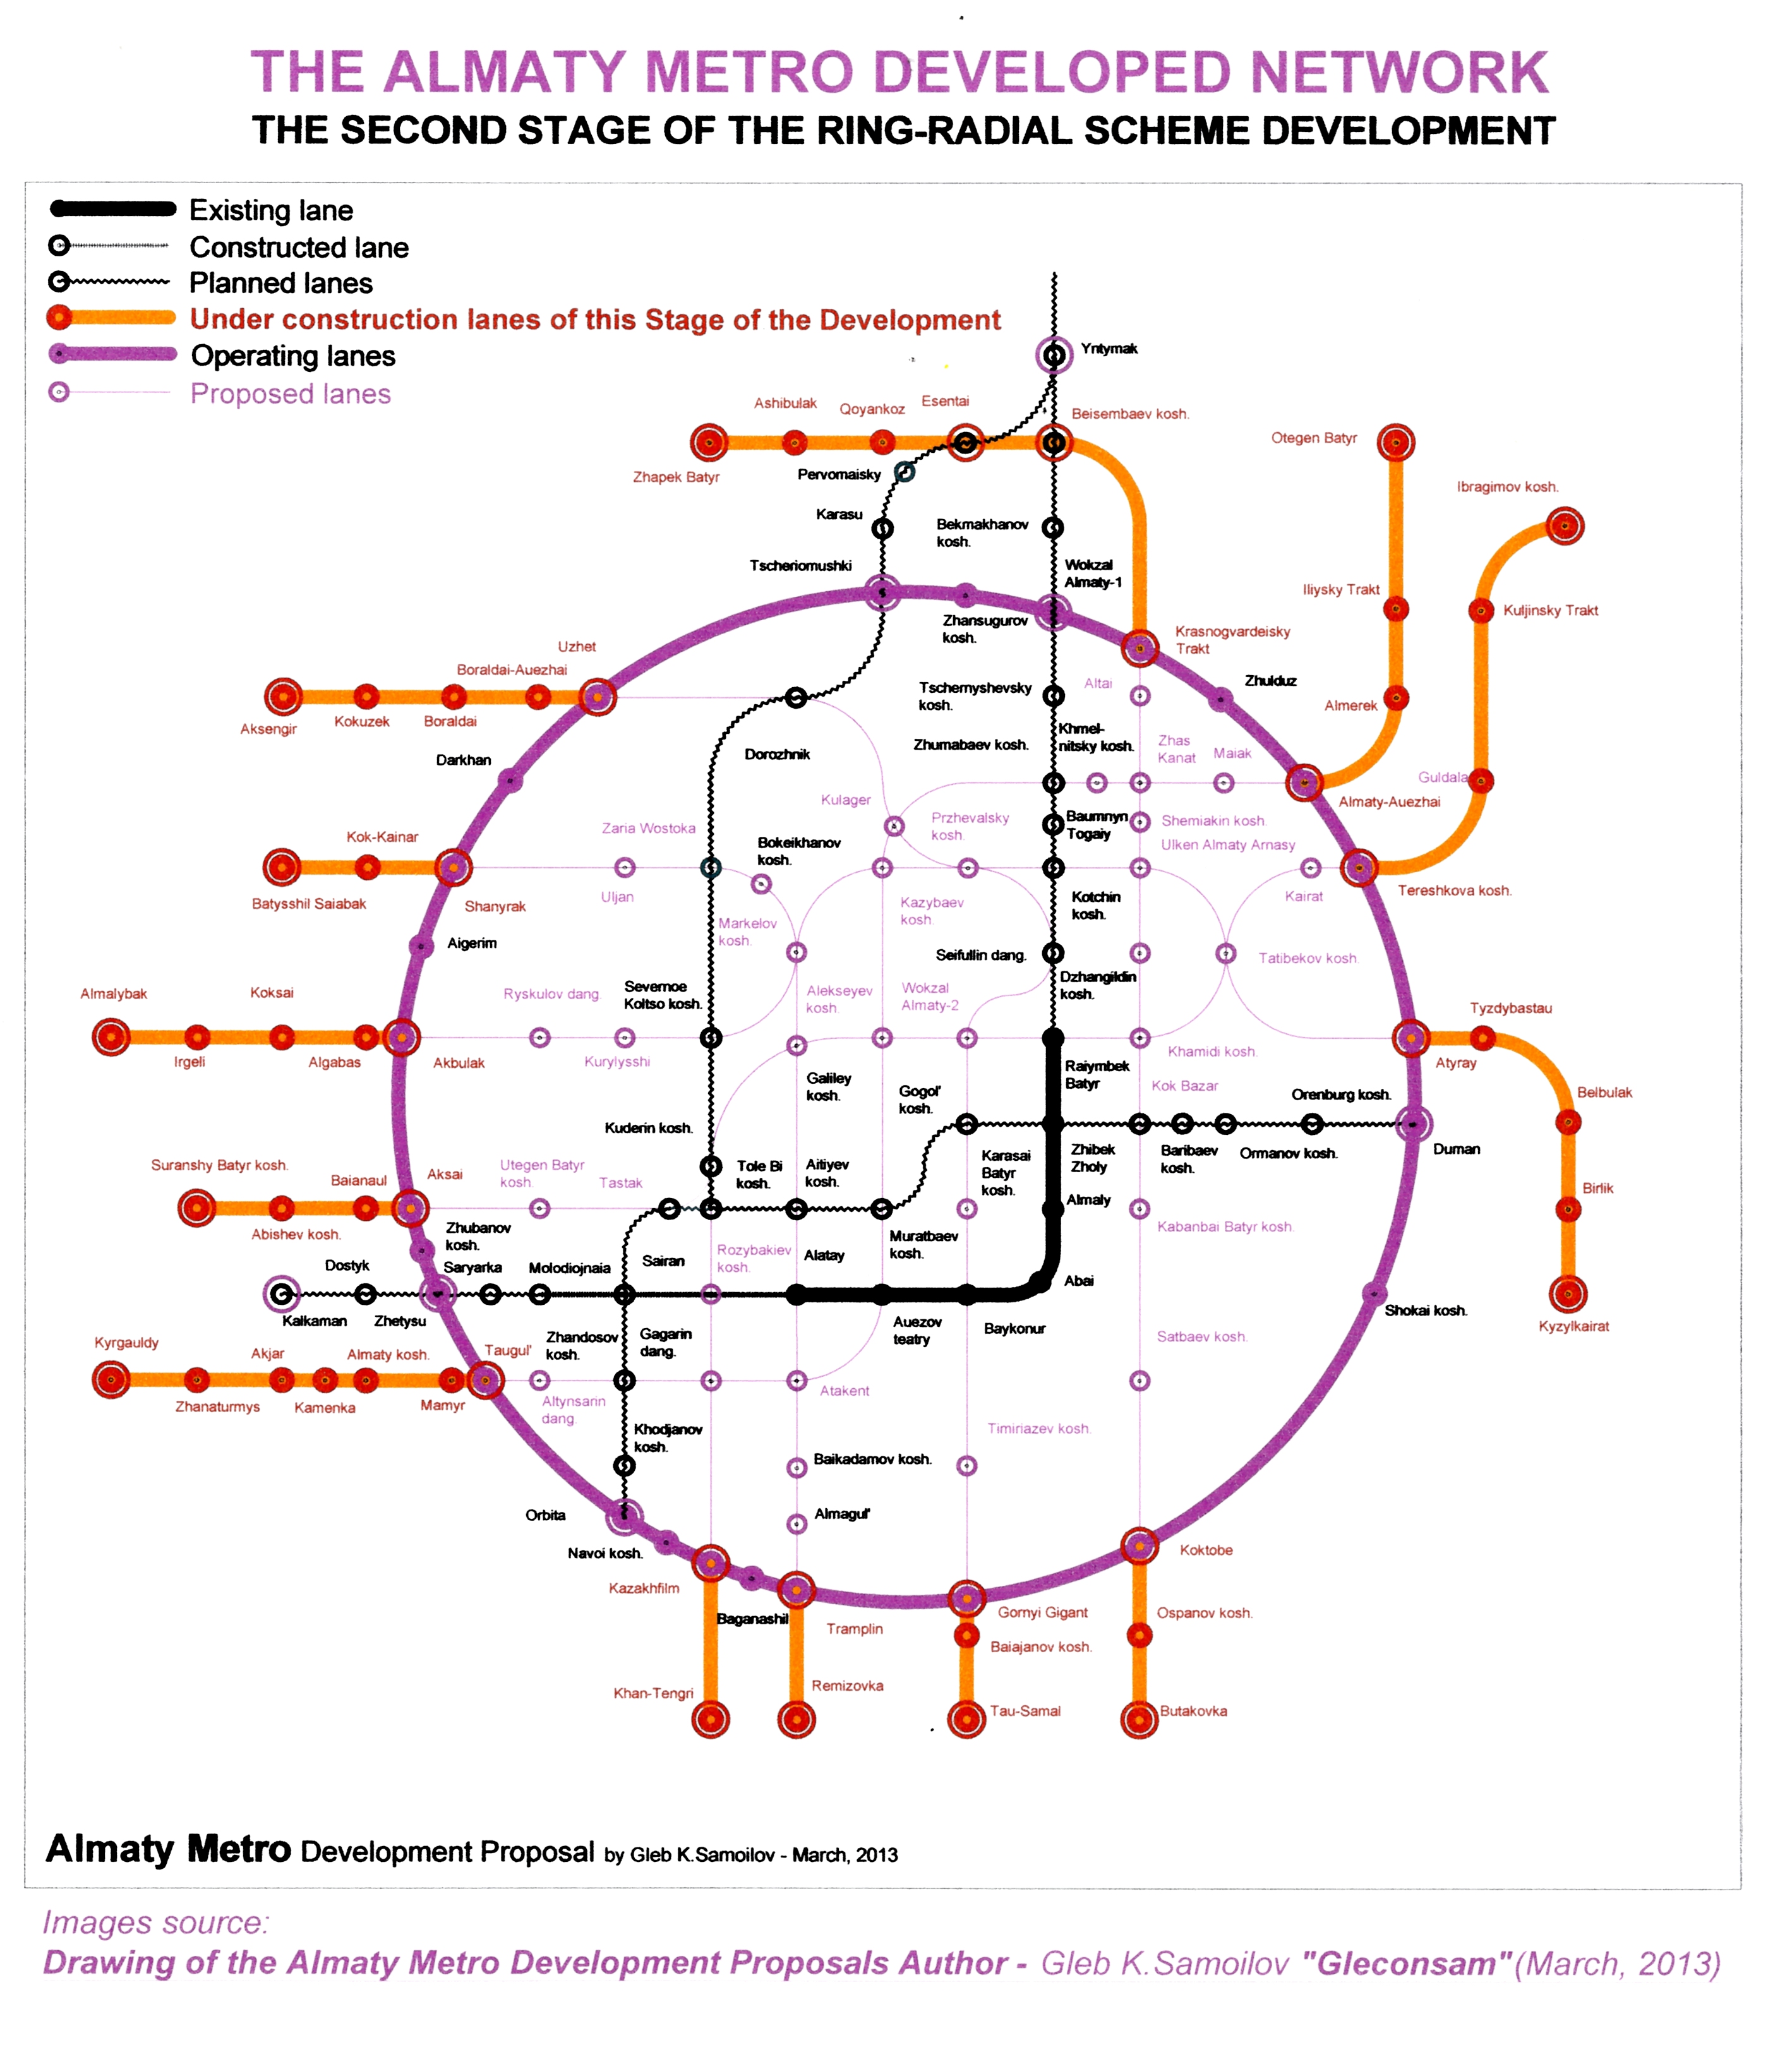 THE ALMATY METRO – the Second Stage of the proposed Ring-Radial scheme development  